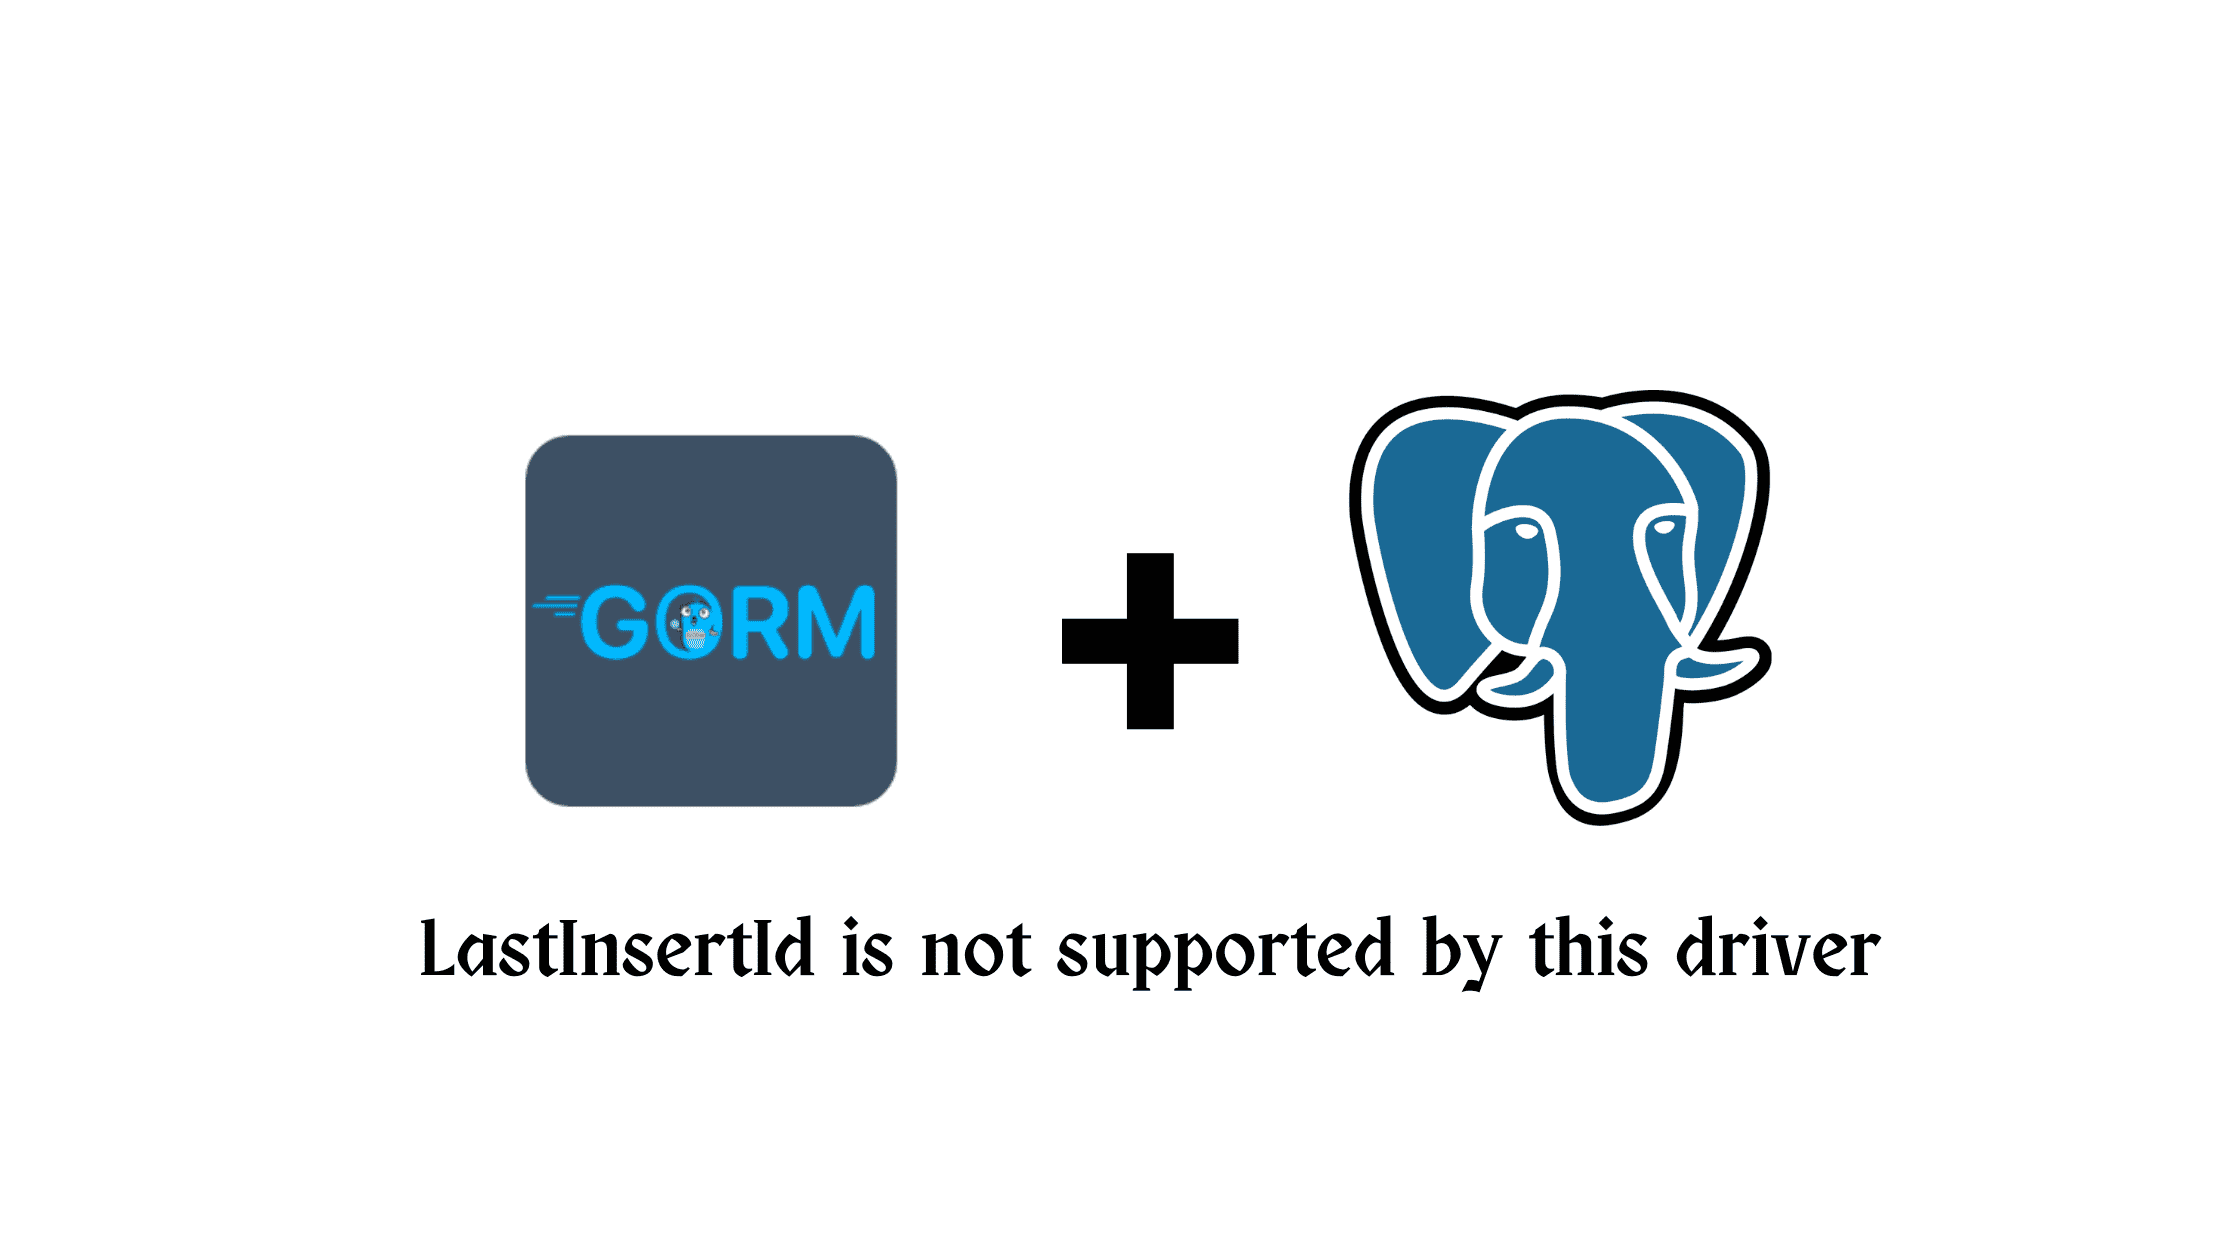 Gorm With Postgres LastInsertId Is Not Supported By This Driver